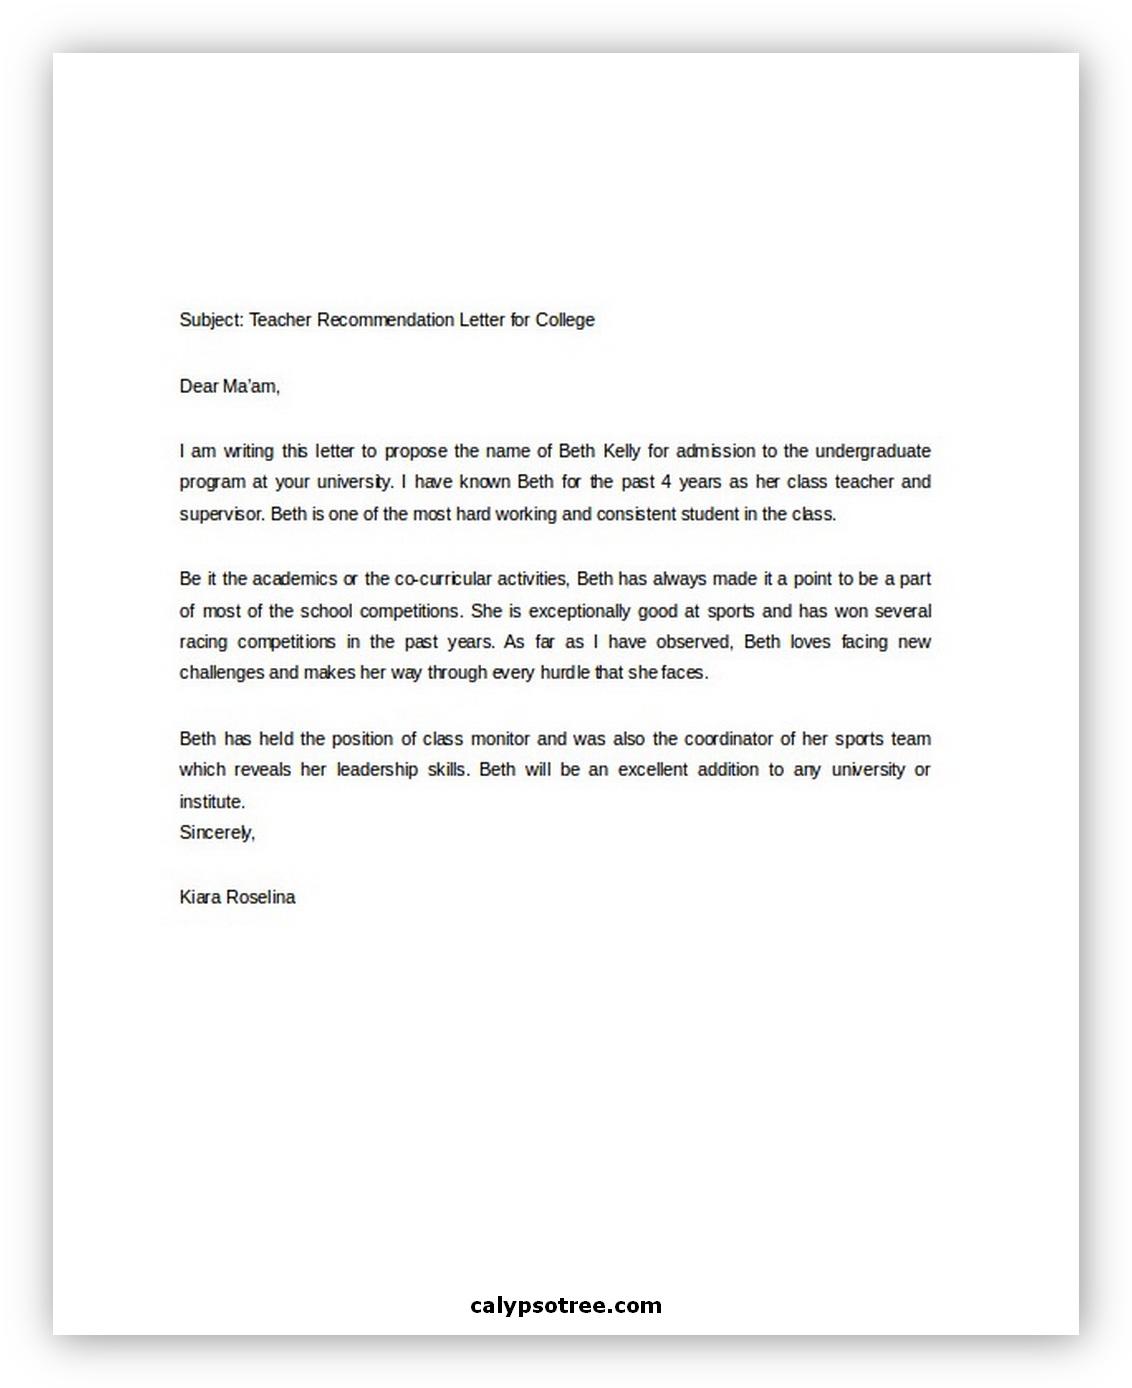 Letter of Recommendation for College 07